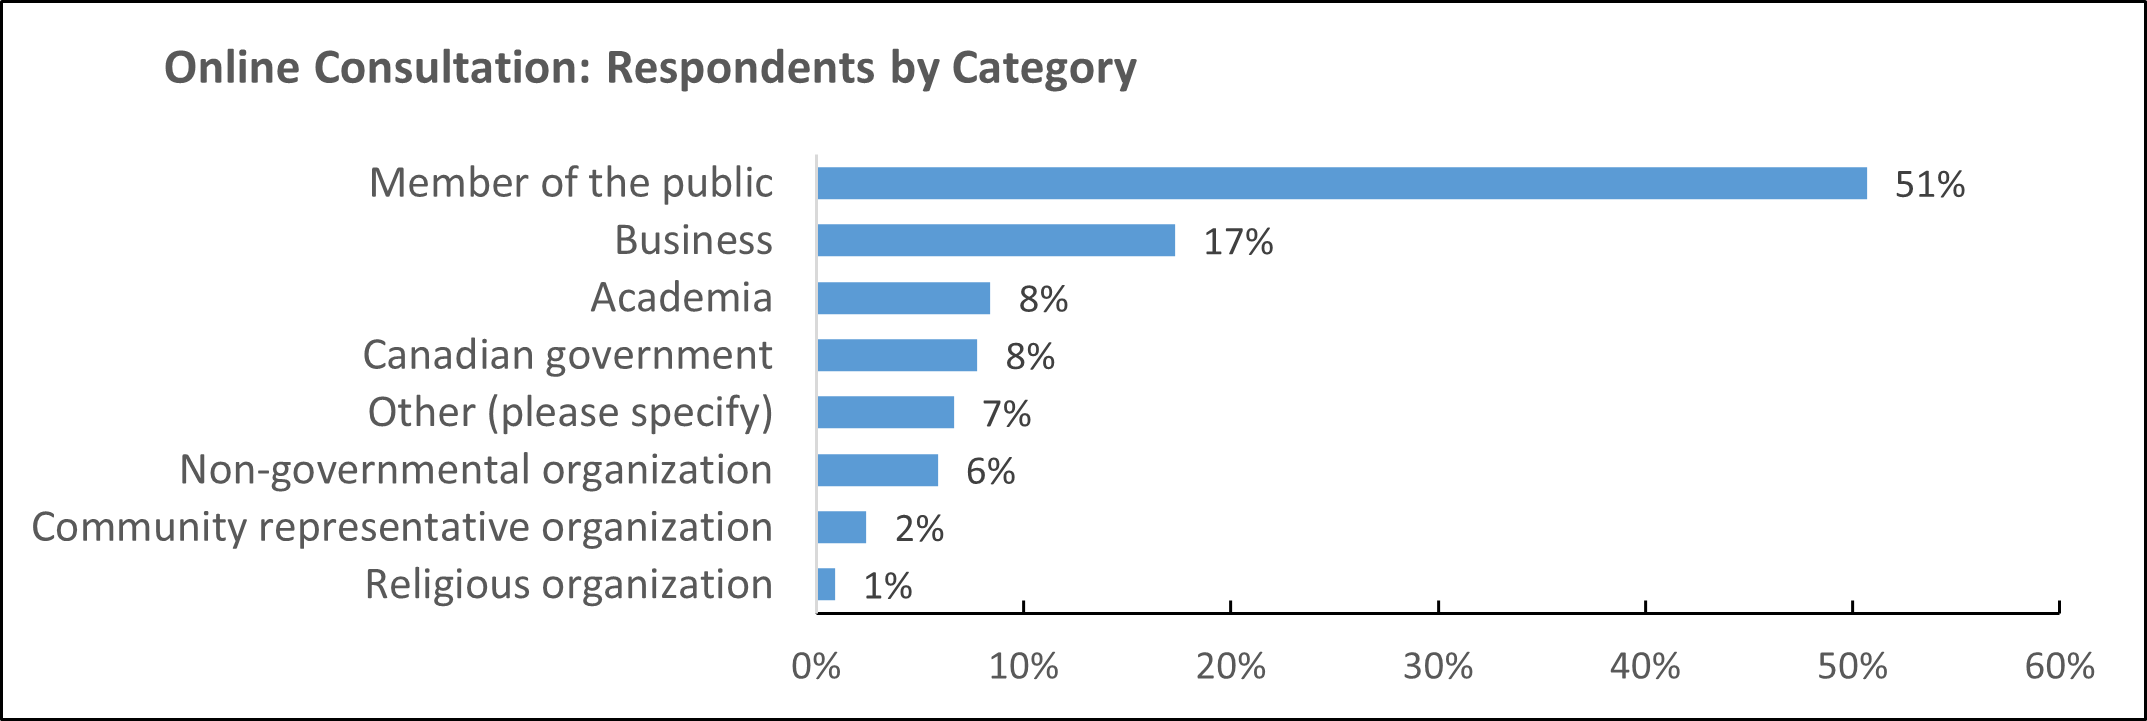 A bar graph depicting the online respondents by category.